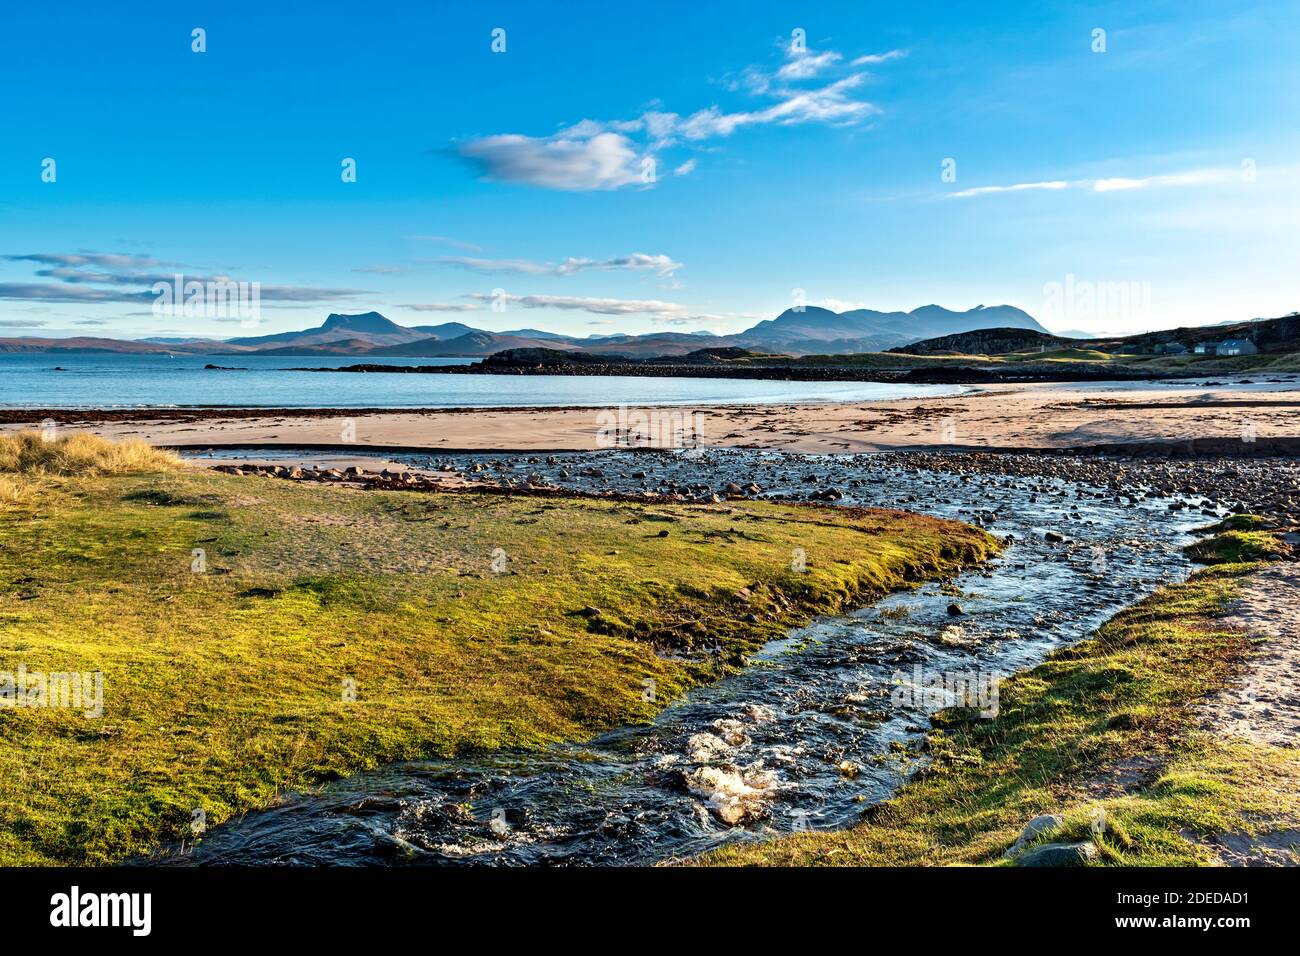 MELLON UDRIGLE ROSS-SHIRE HIGHLANDS SCOTLAND MORNING SUNSHINE SMALL STREAM LEADING TO THE BEACH AND VIEW TO MOUNTAIN RANGES Stock Photo